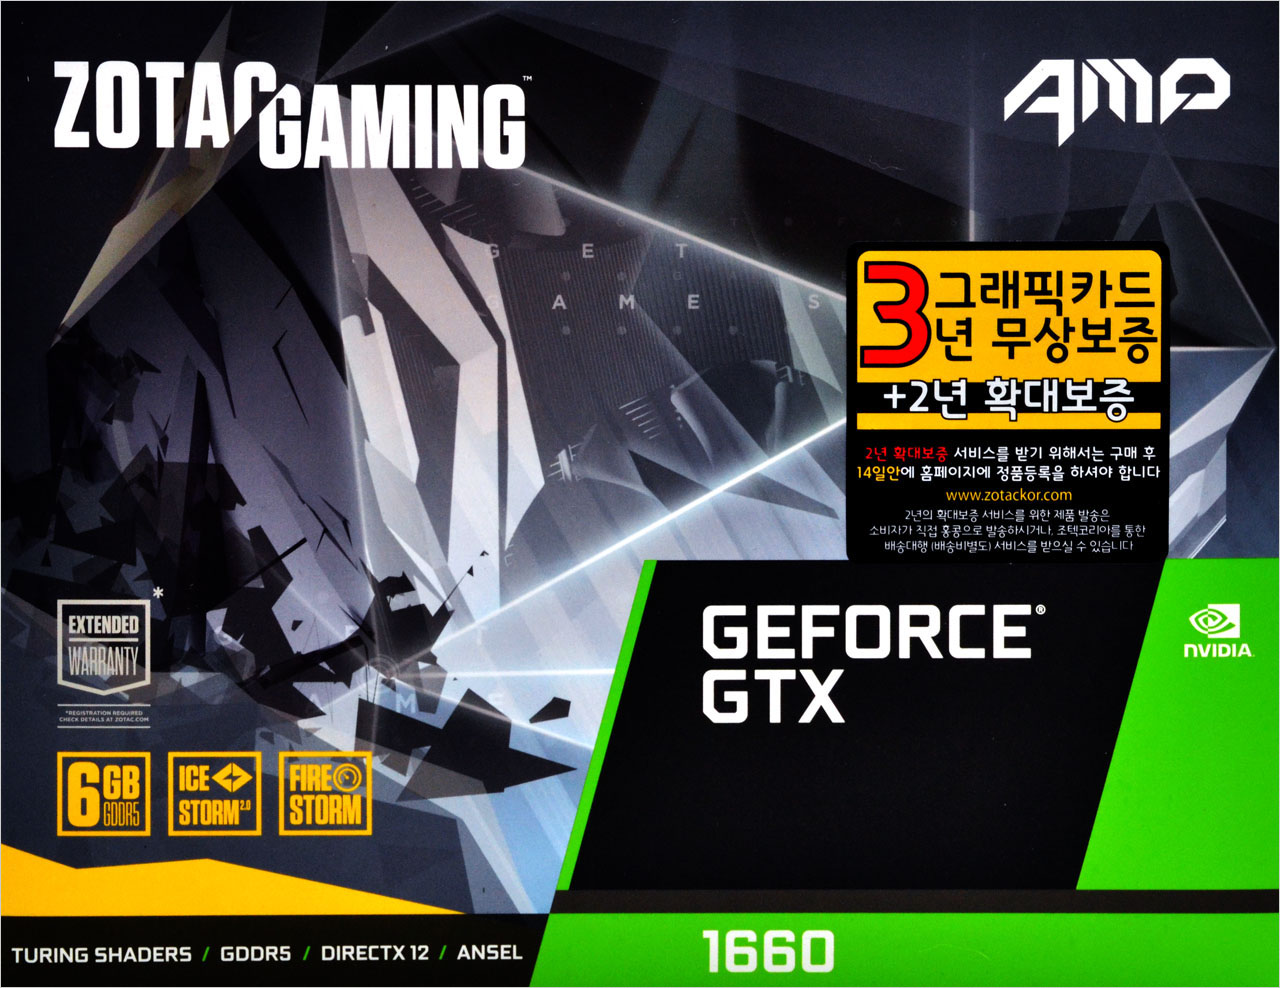 ZOTAC GeForce GTX 1660 AMP! Edition Backplate - Front side package box